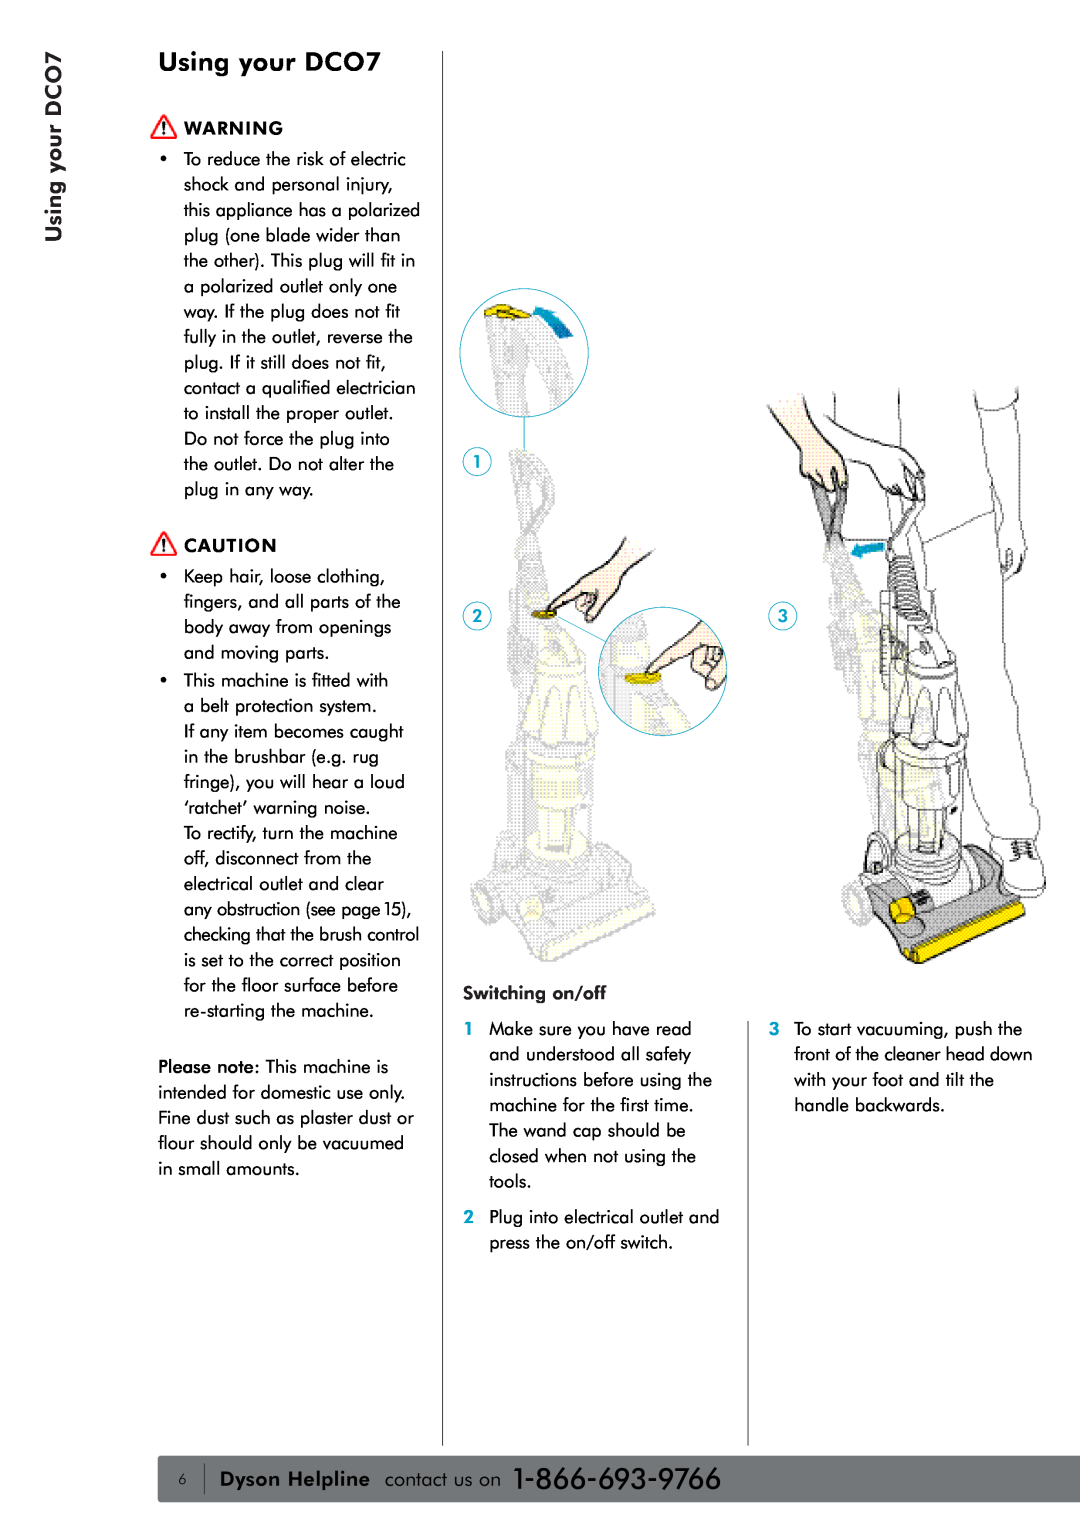 Dyson water filter owner manual Using your DCO7, Dyson Helpline contact us on 